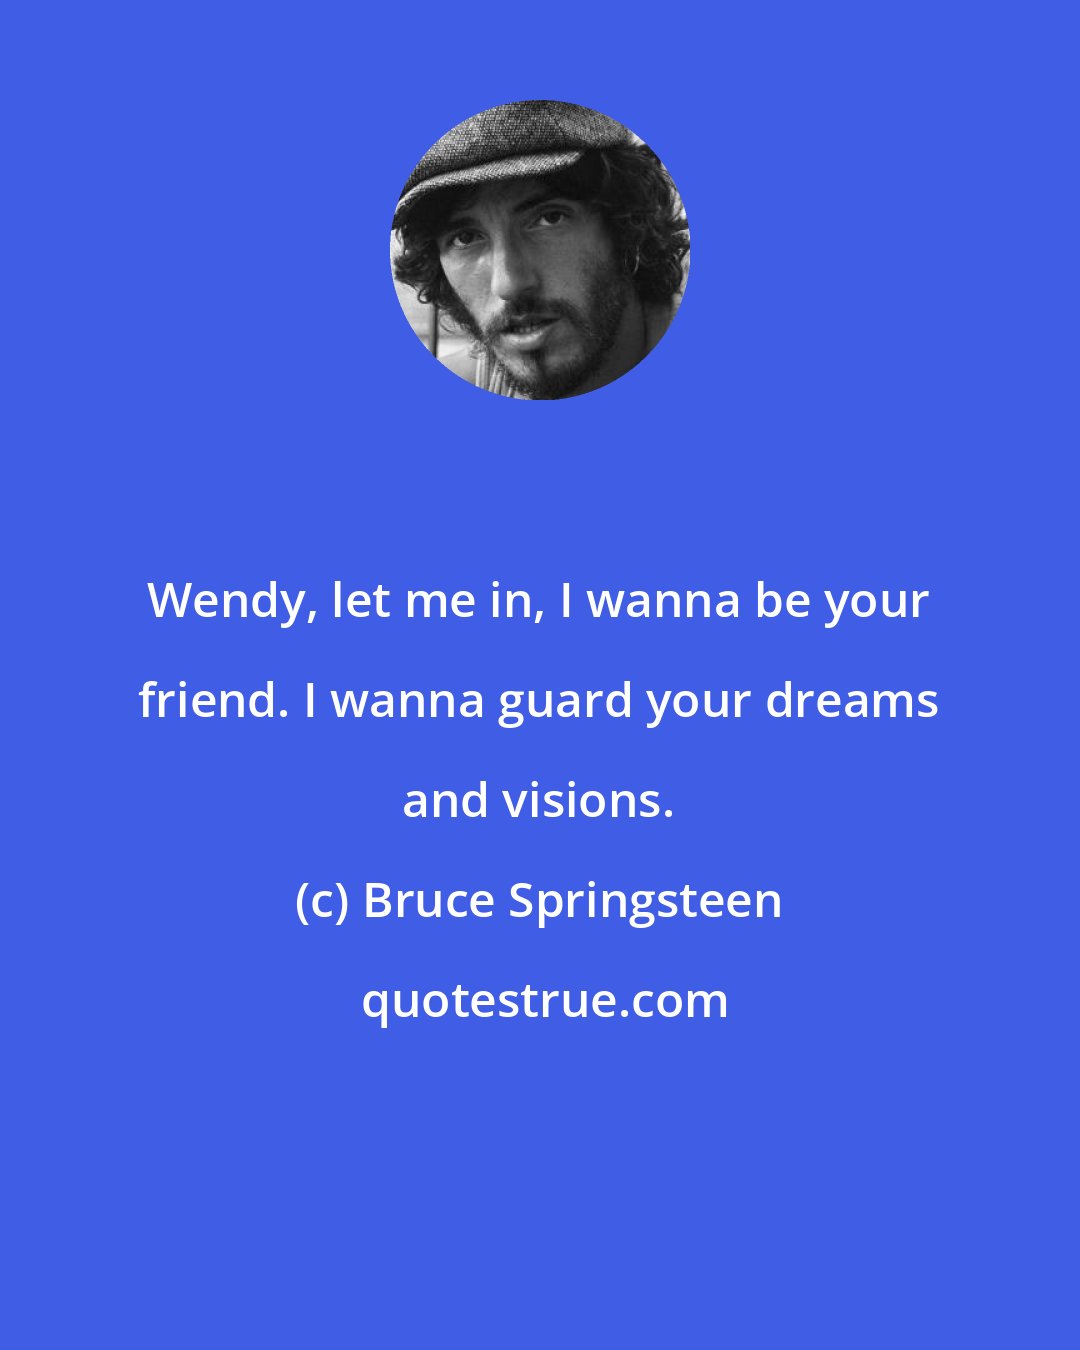 Bruce Springsteen: Wendy, let me in, I wanna be your friend. I wanna guard your dreams and visions.